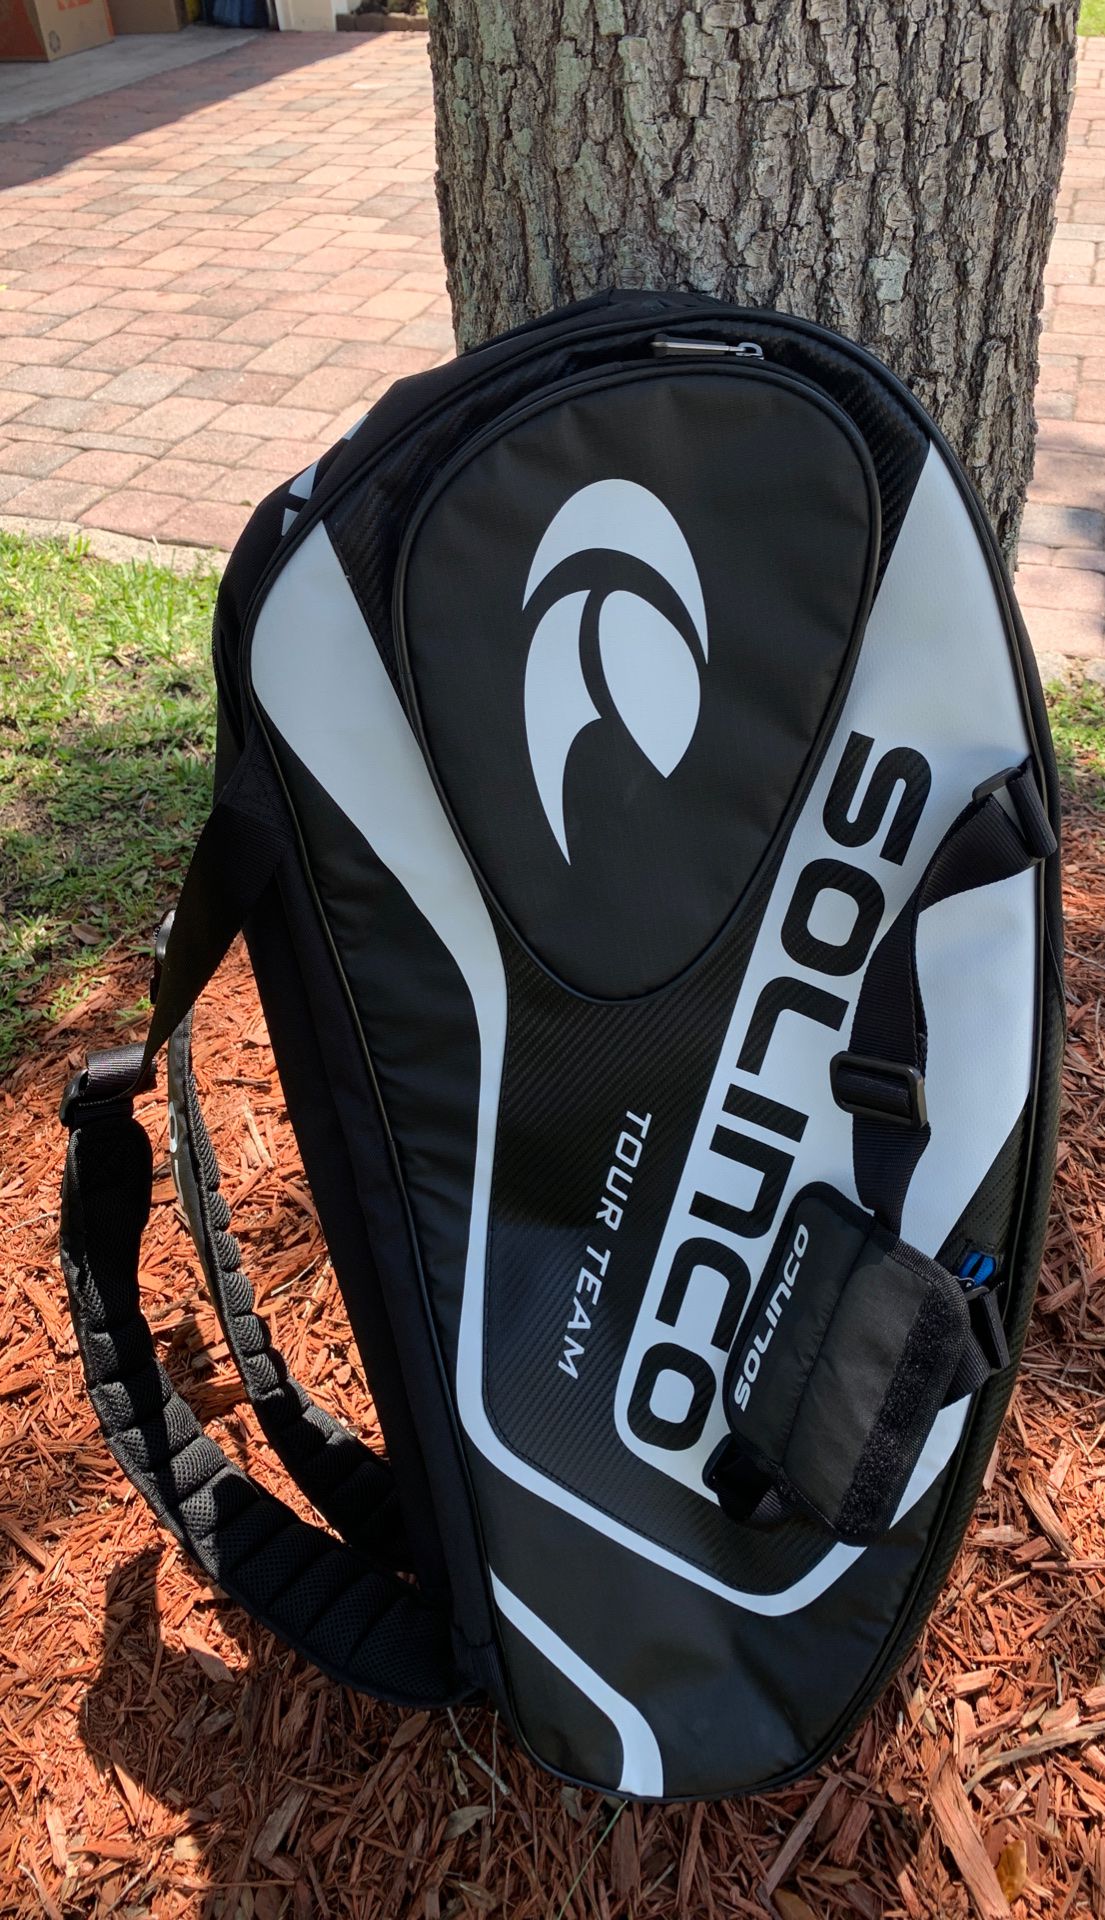 Solinco Brand New Tour 9 Tennis Racket Bag Backpack NEW